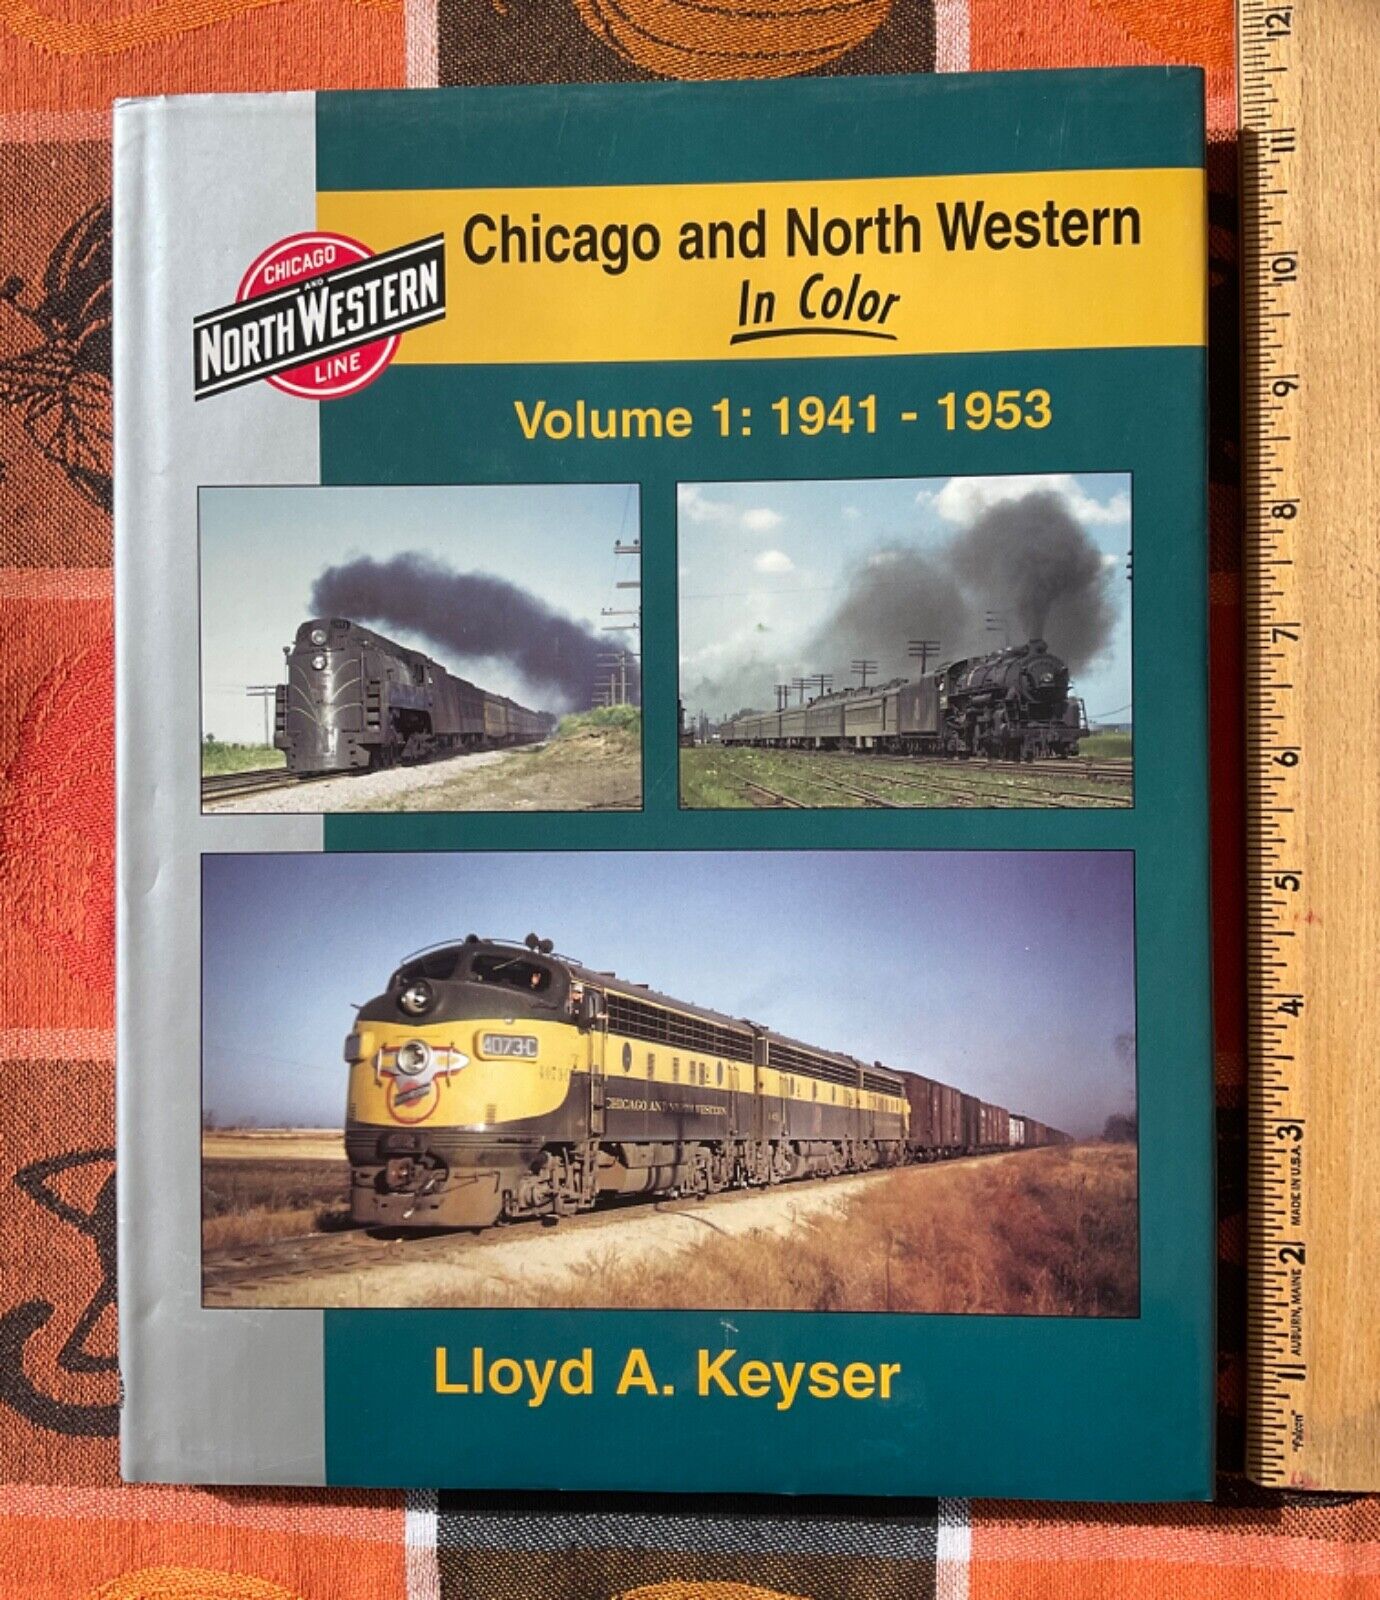 Chicago and North Western in Color Volume 1: 1941-1953 Lloyd A Keyser 1997